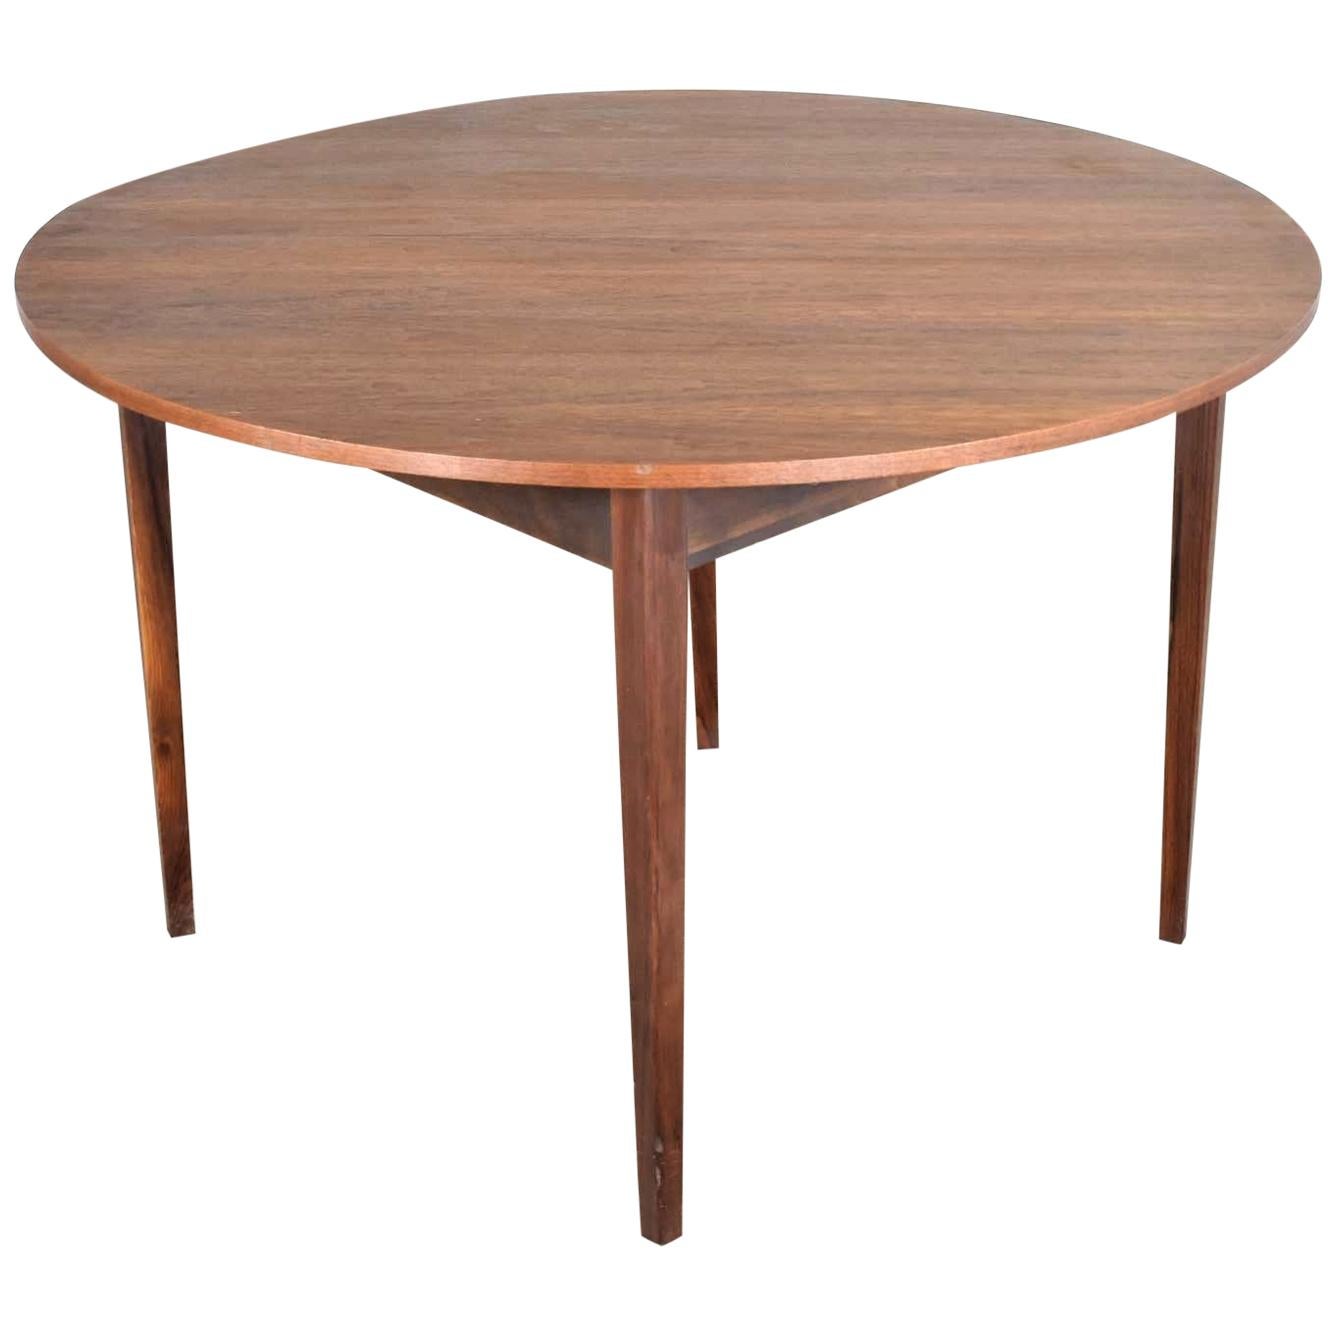 Mid-Century Modern Walnut Round Flip Top or Folding Dining Table to Demilune